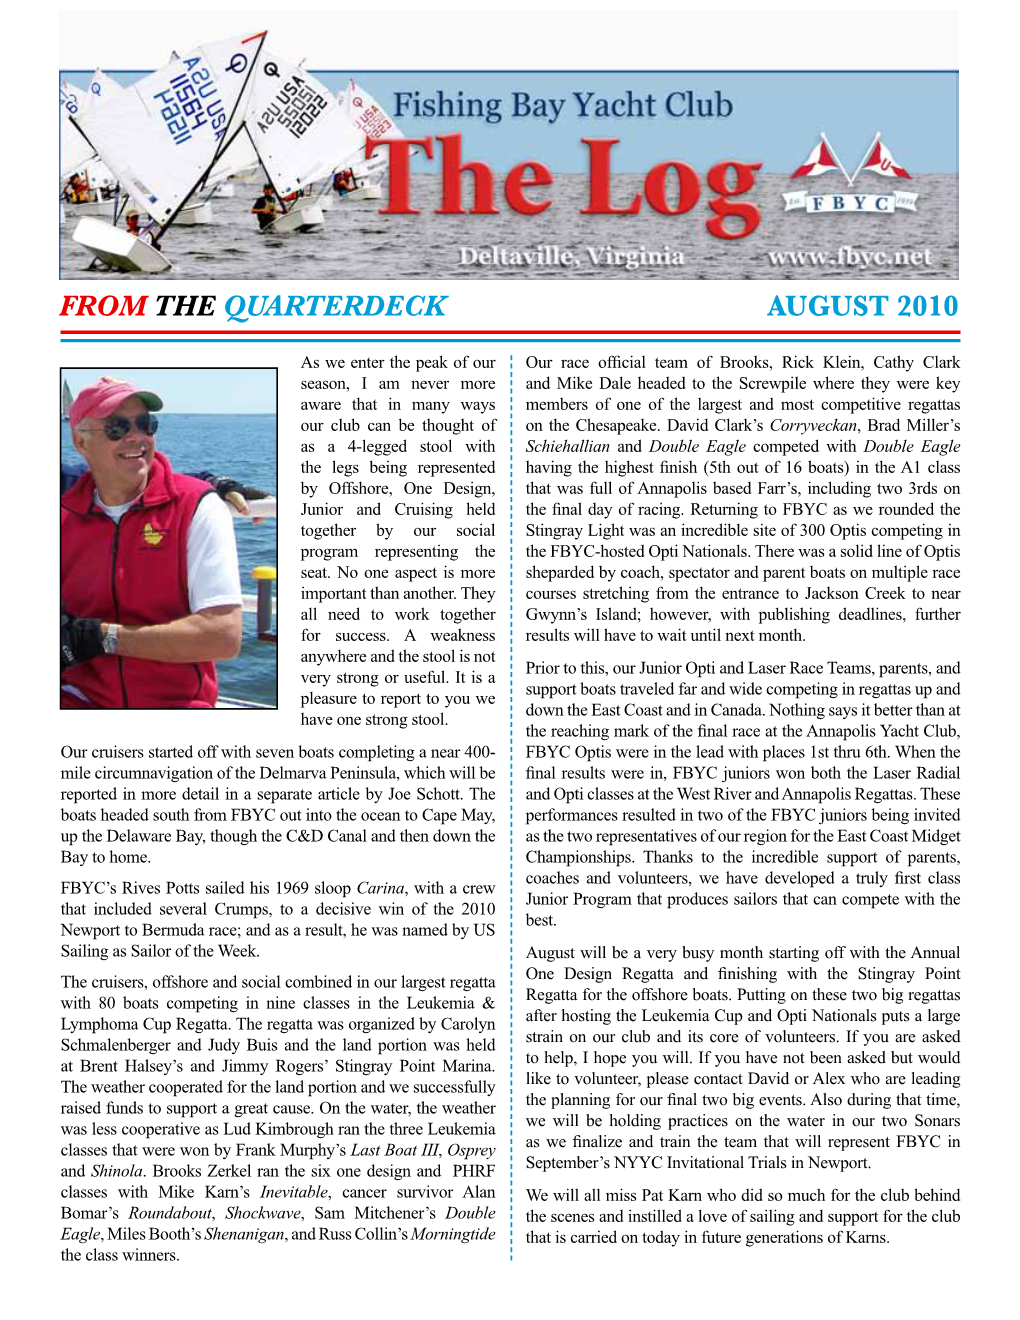 From the Quarterdeck August 2010